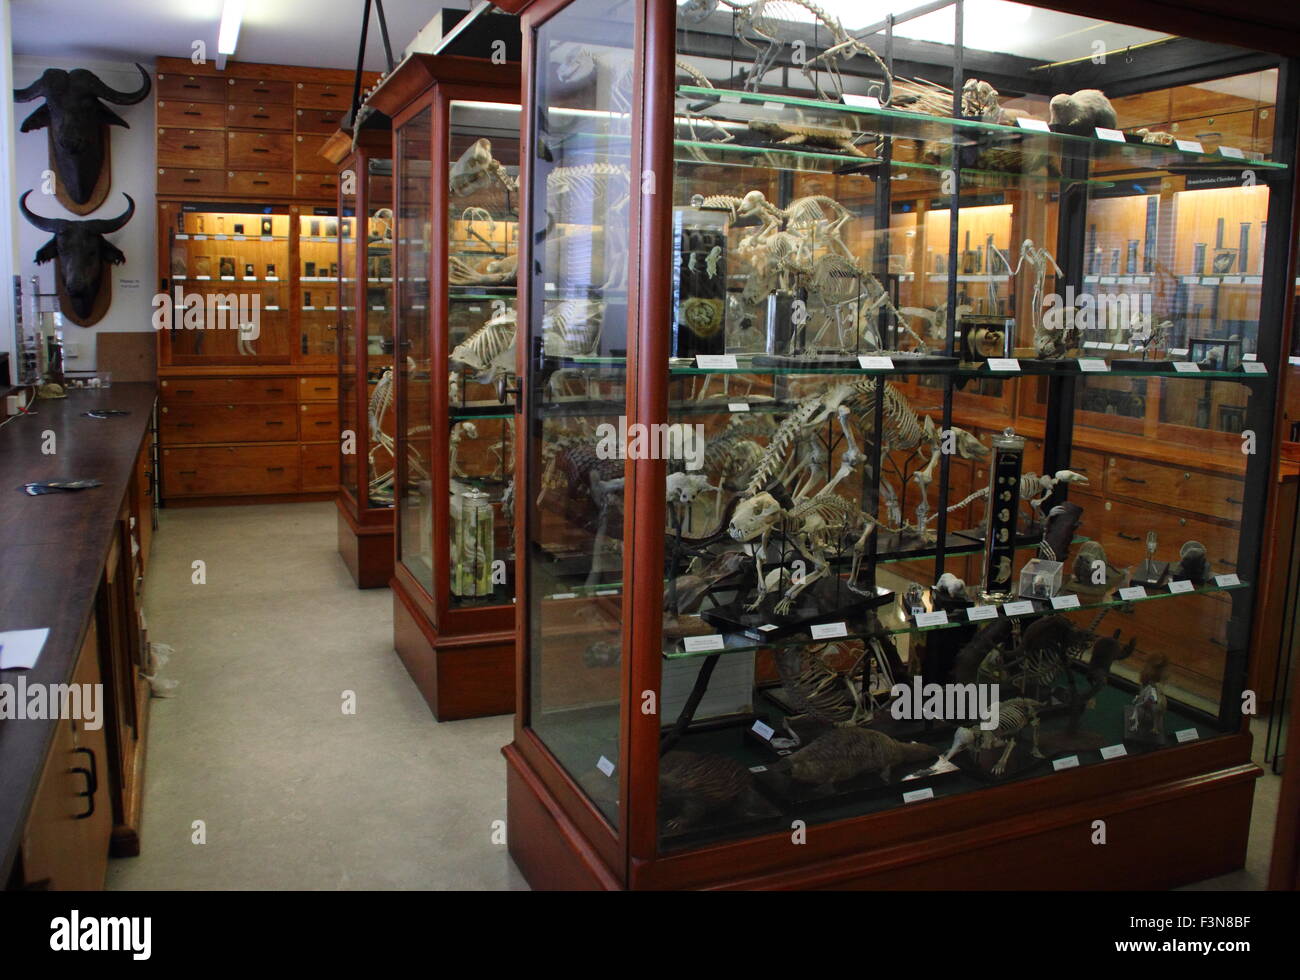 Zoological specimens displayed in glass cabinets inside The Alfred Denny Zoological Museum at The University of Sheffield, UK Stock Photo